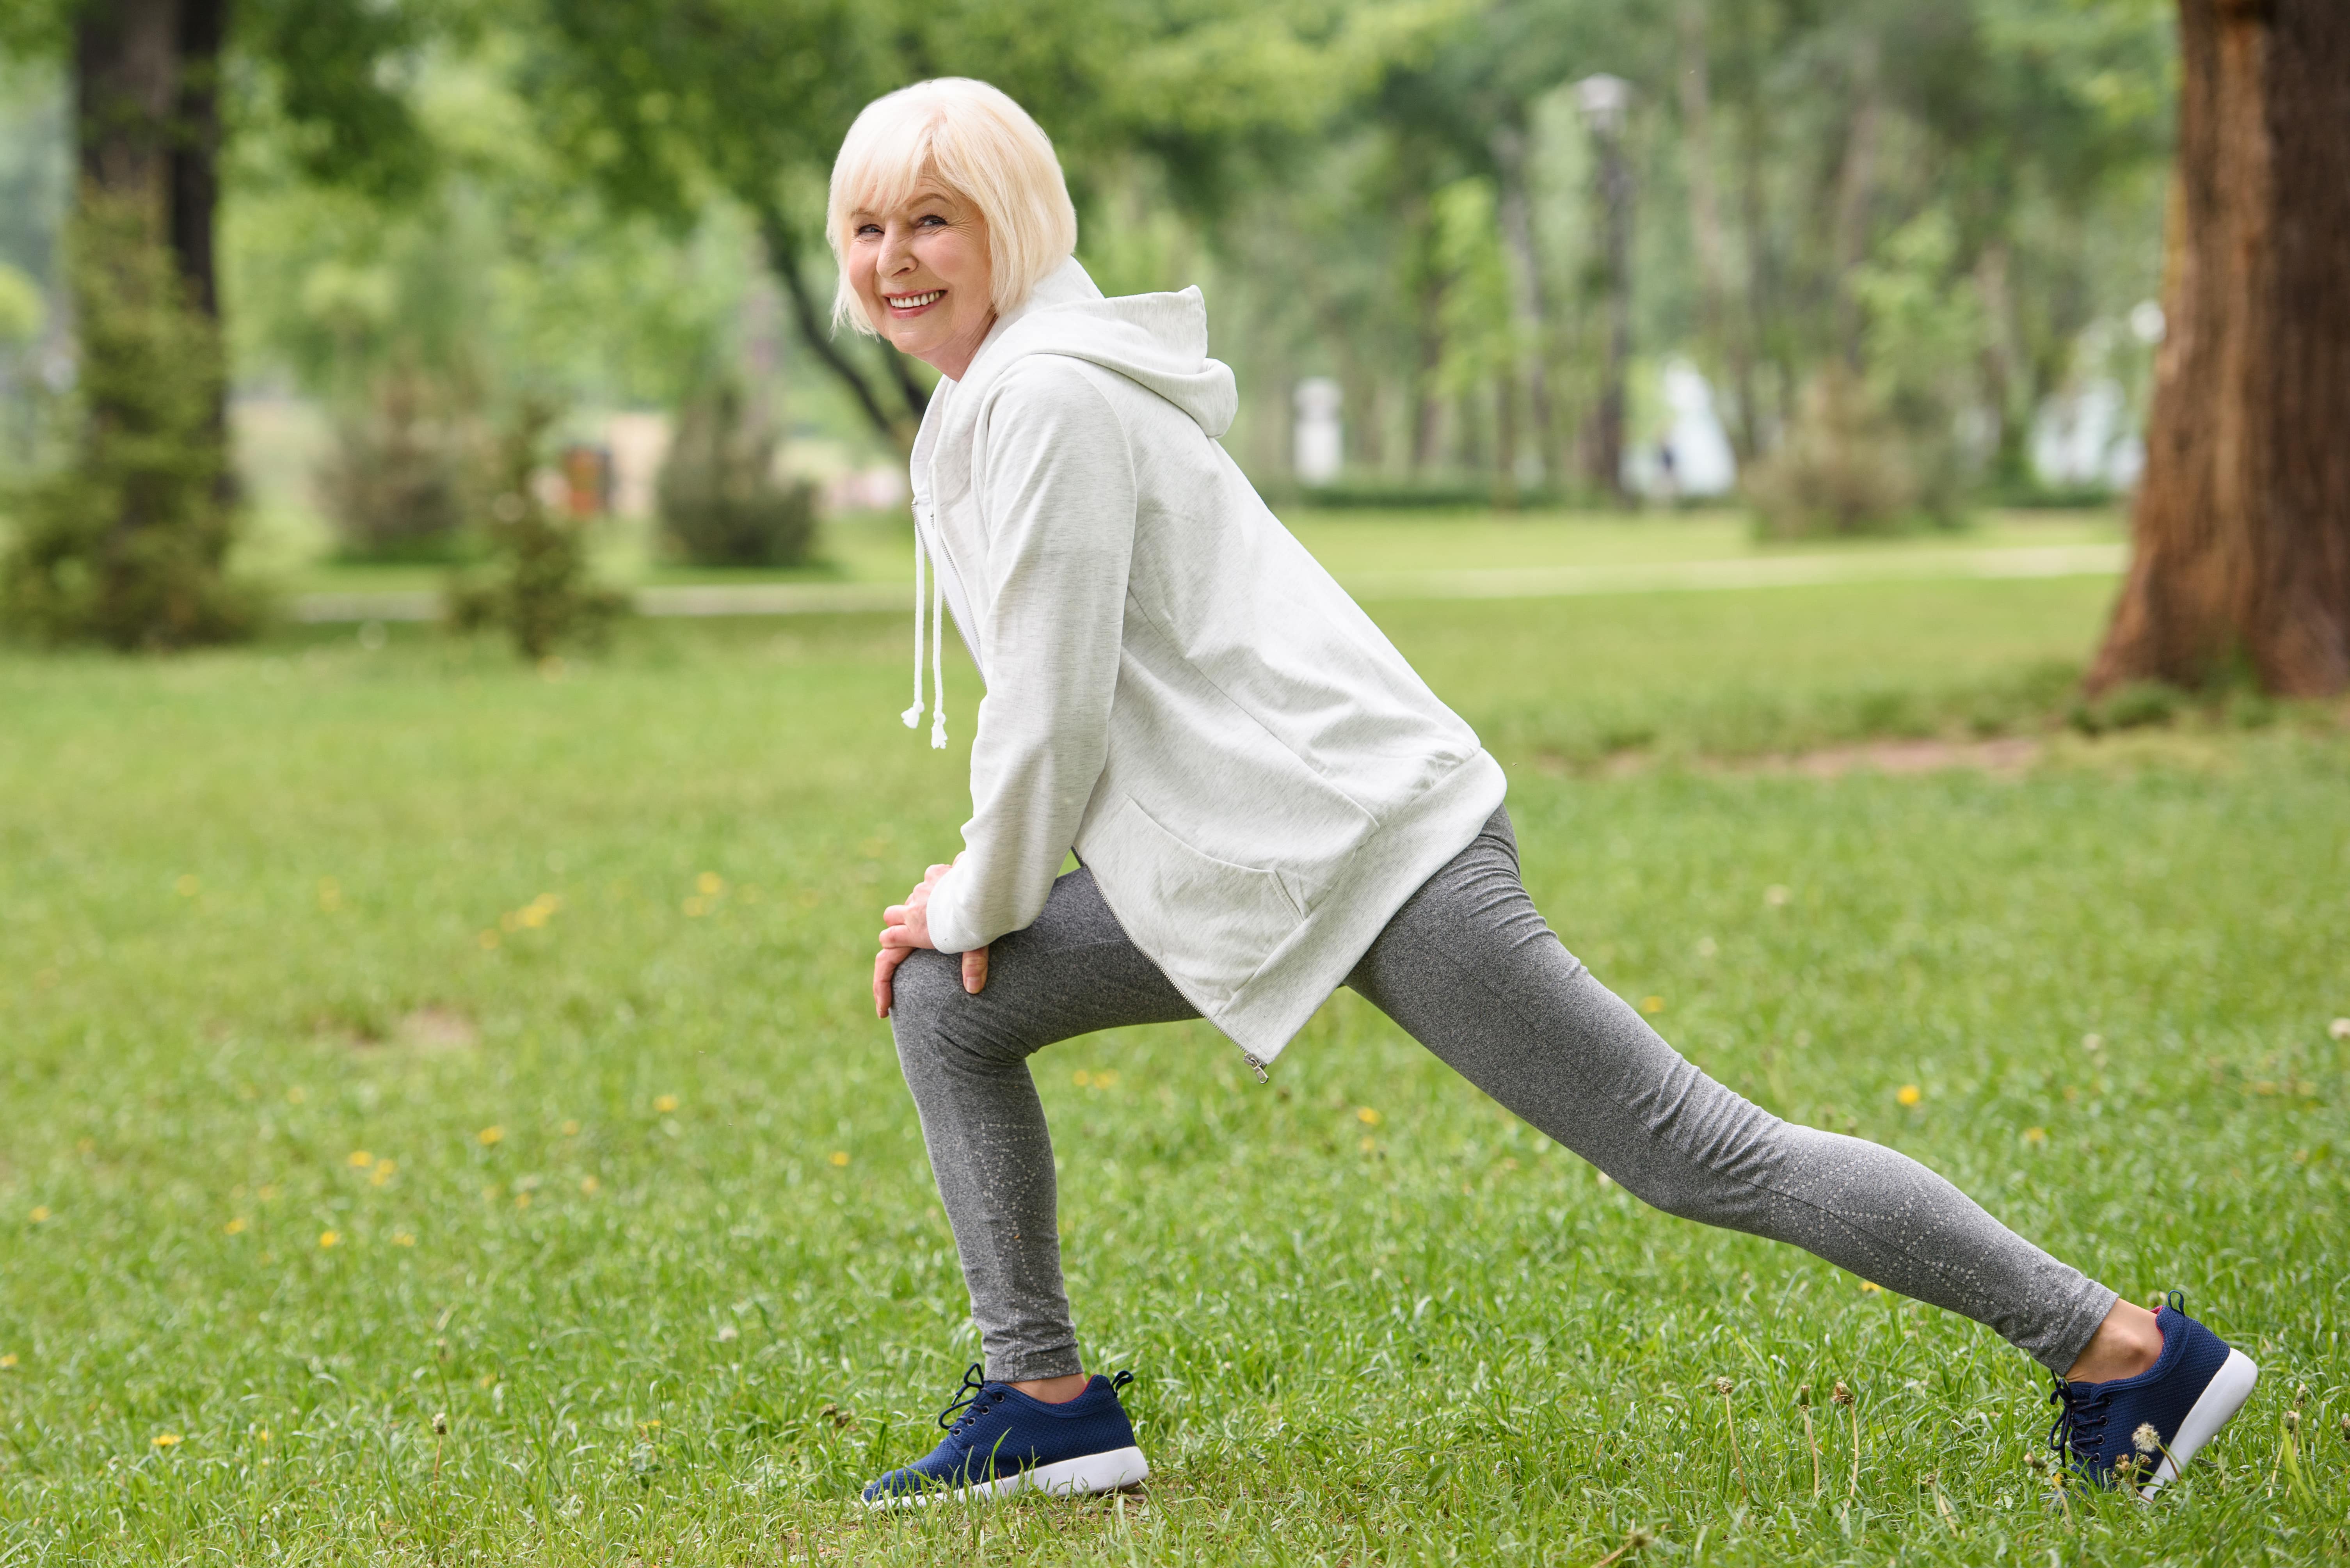 https://www.thegablesonpelham.com/wp-content/uploads/2023/06/Senior-woman-stretching-in-the-park.jpg